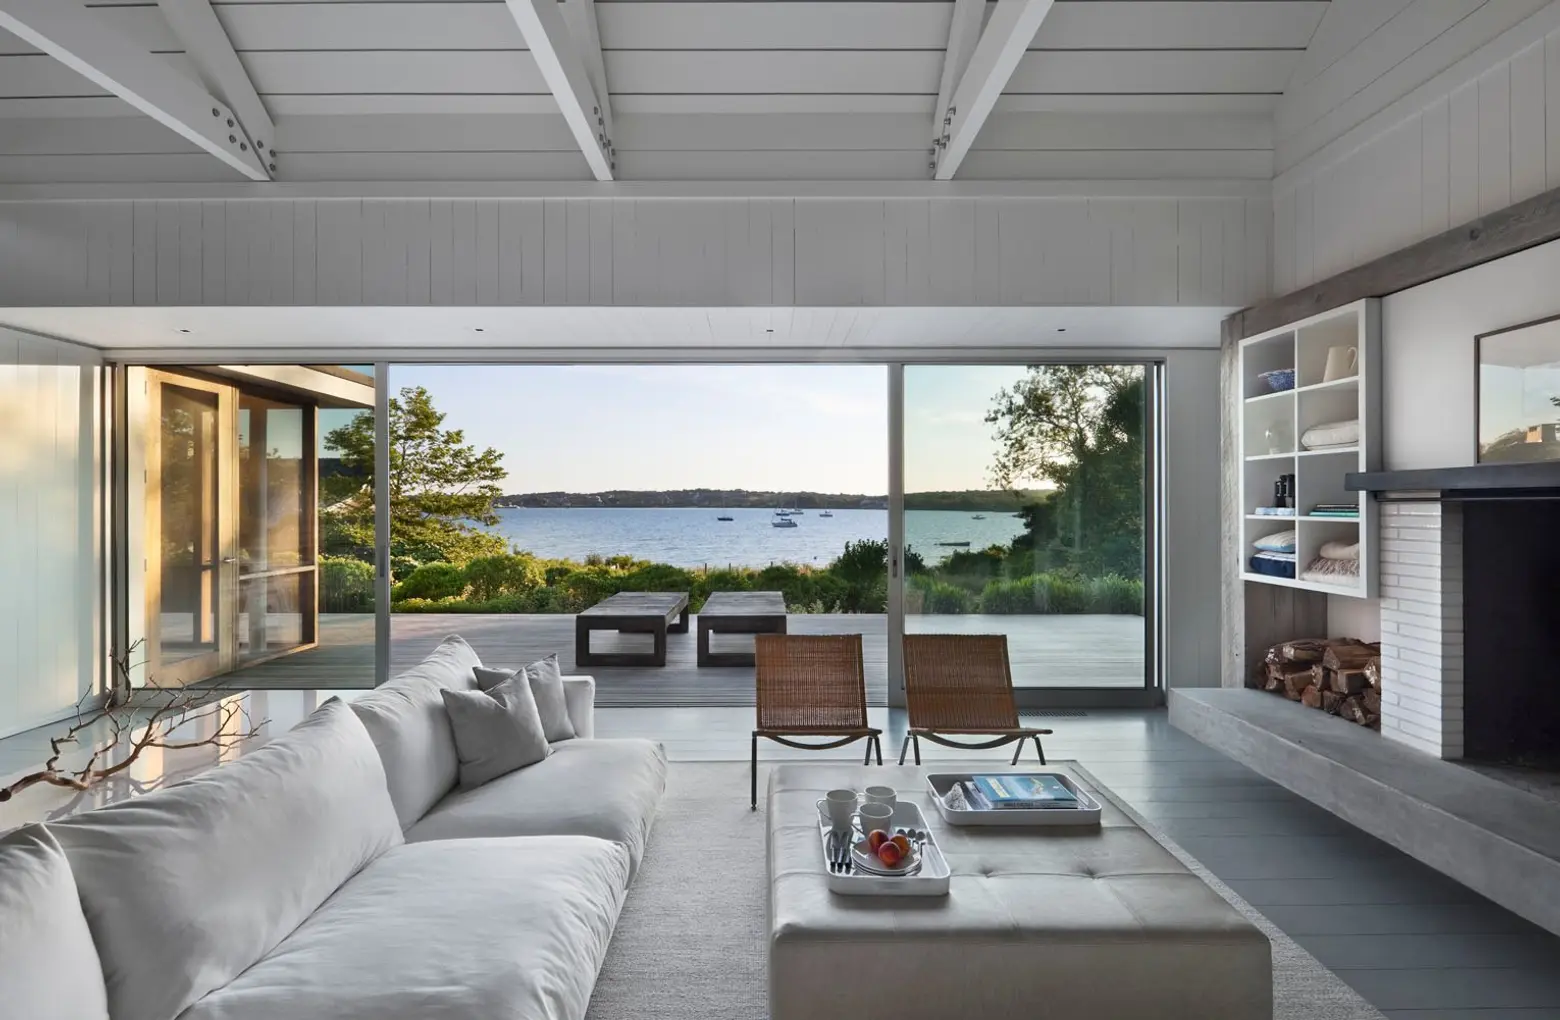 Montauk Lake House designer by Robert Young Architecture & Interiors